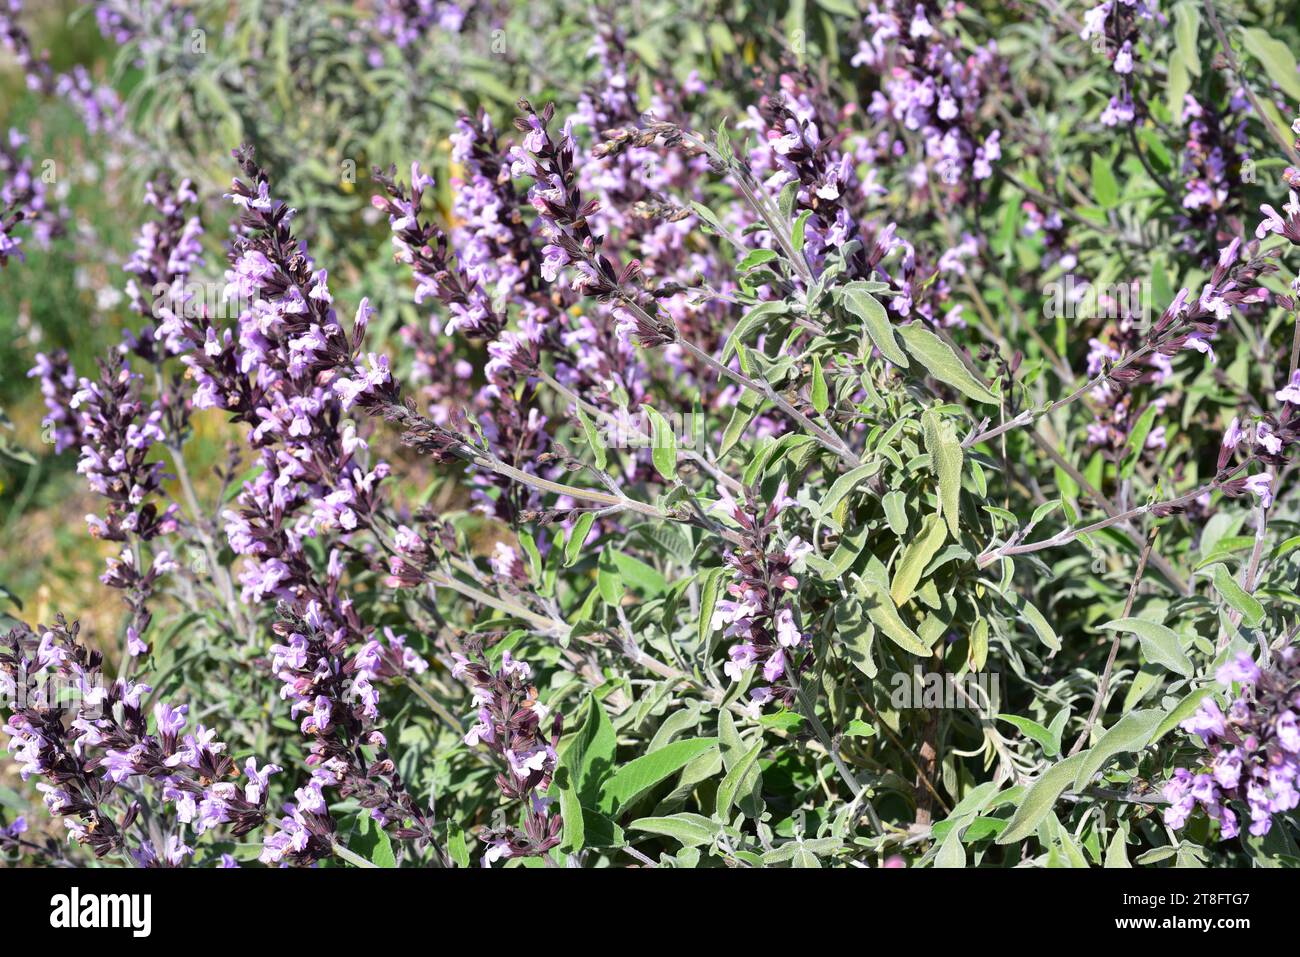 Greek sage (Salvia fruticosa) is an edible and medicinal shrub native to eastern Mediterranean region and Canary Islands. Flowering plant. Stock Photo